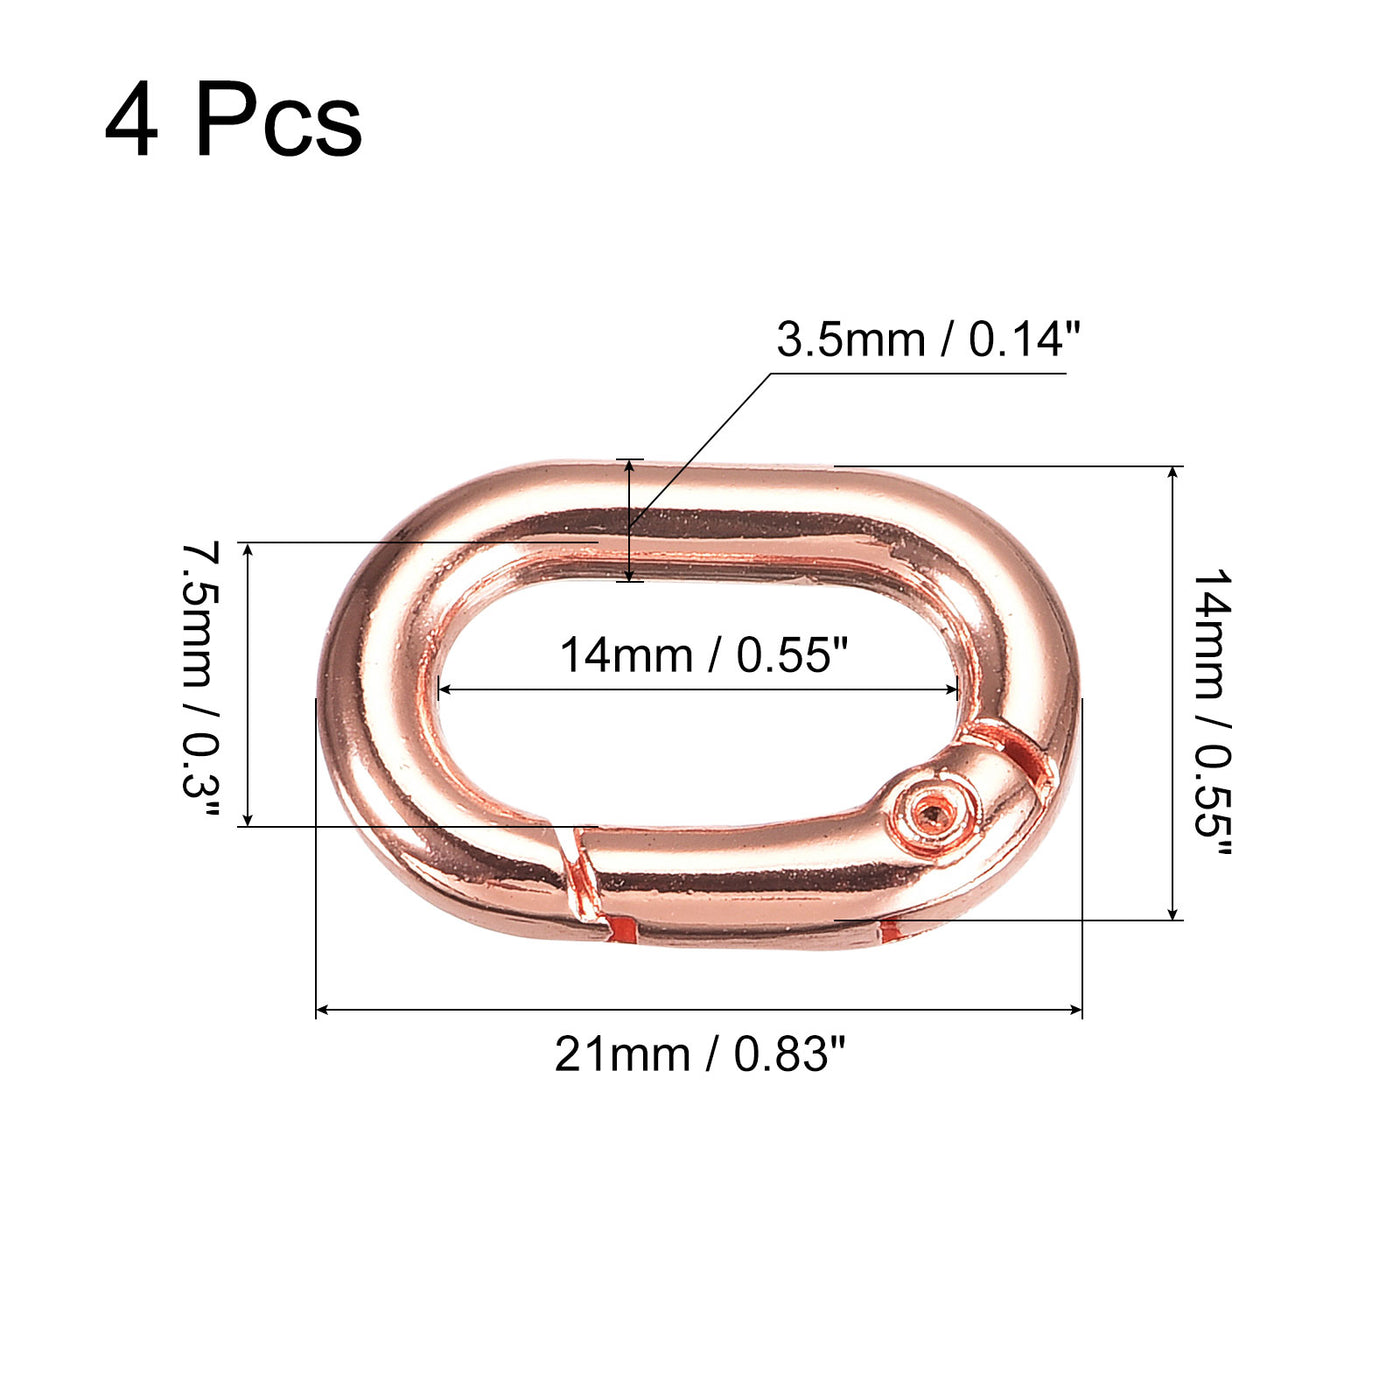 uxcell Uxcell 0.83" Spring Oval Ring Snap Clip Trigger for Bag Purse Keychain, 4Pcs Rose Gold